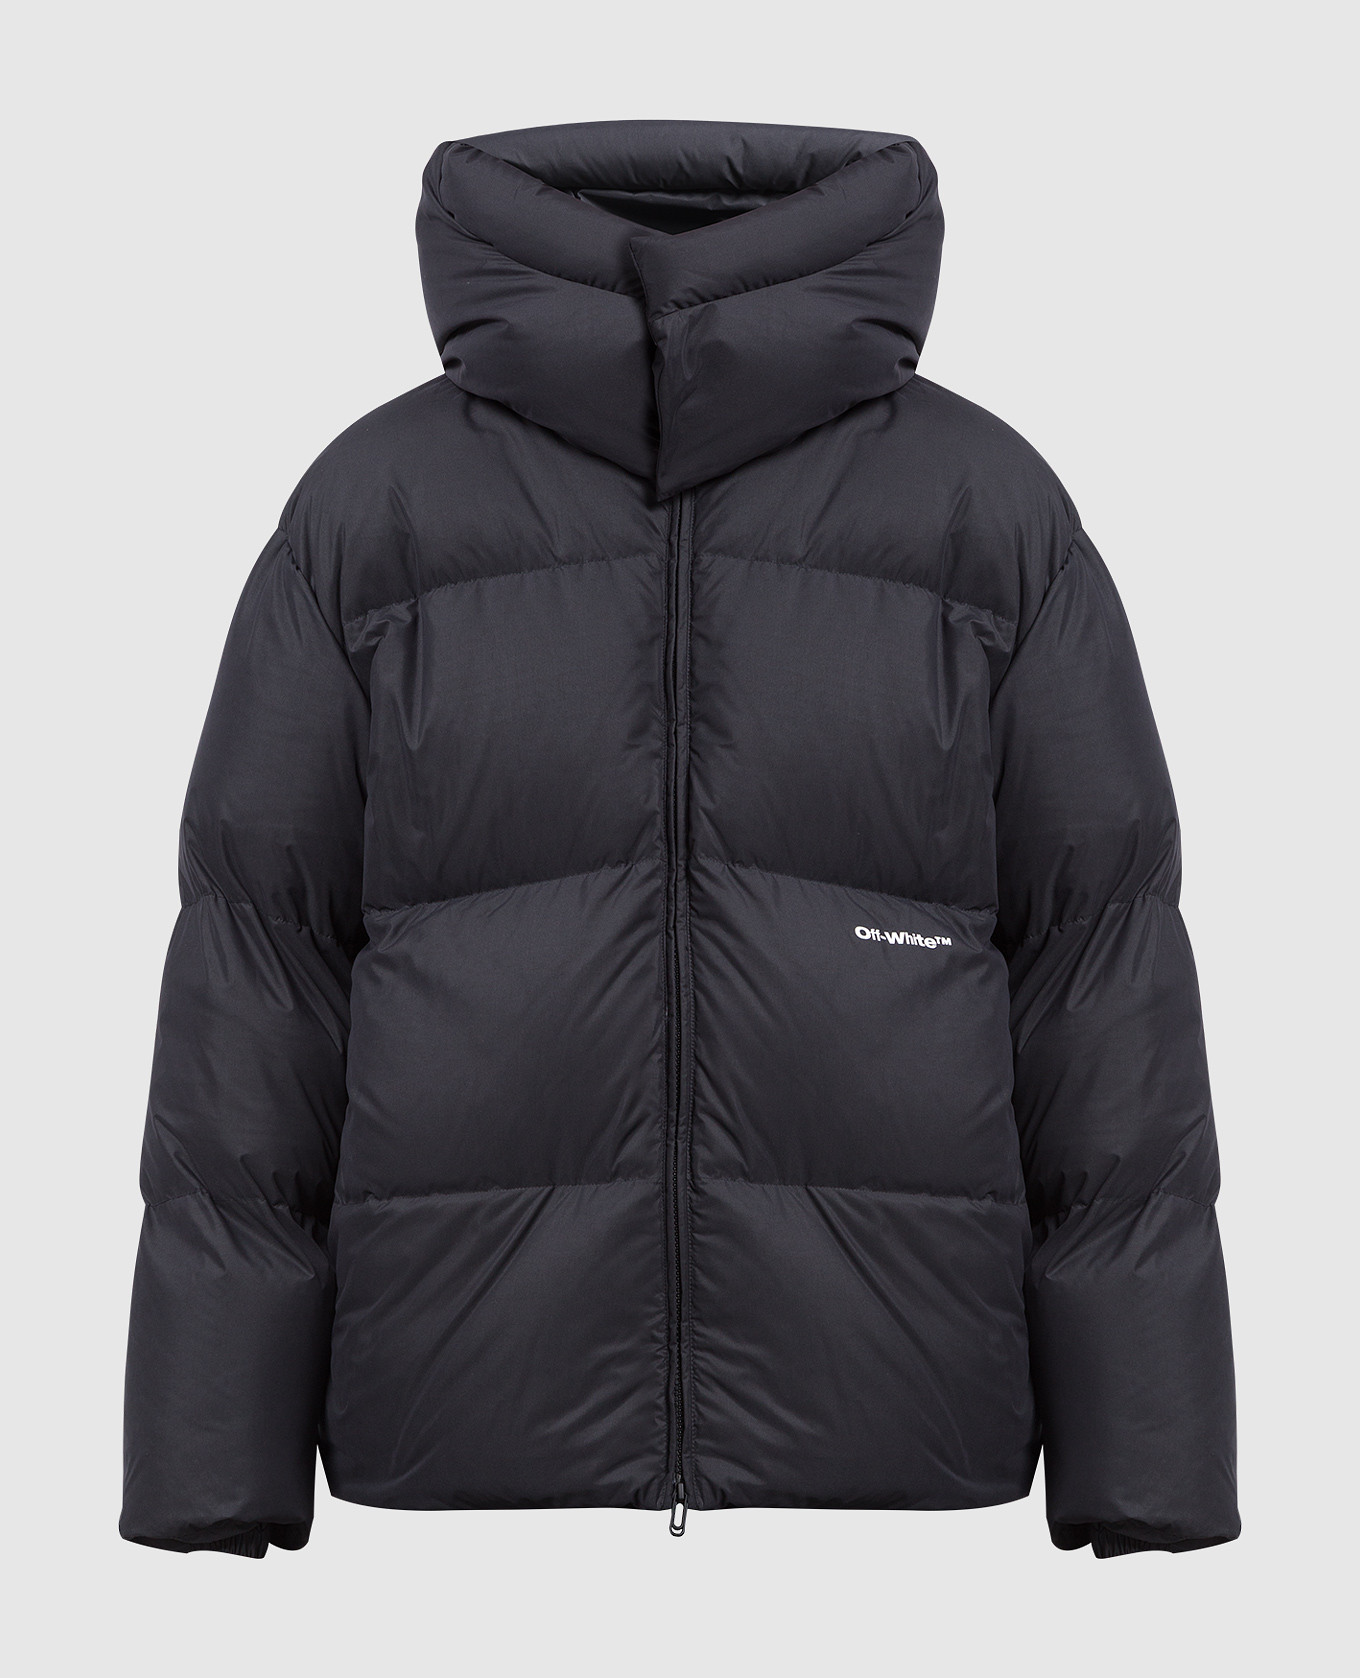 Black down jacket with contrast logo print